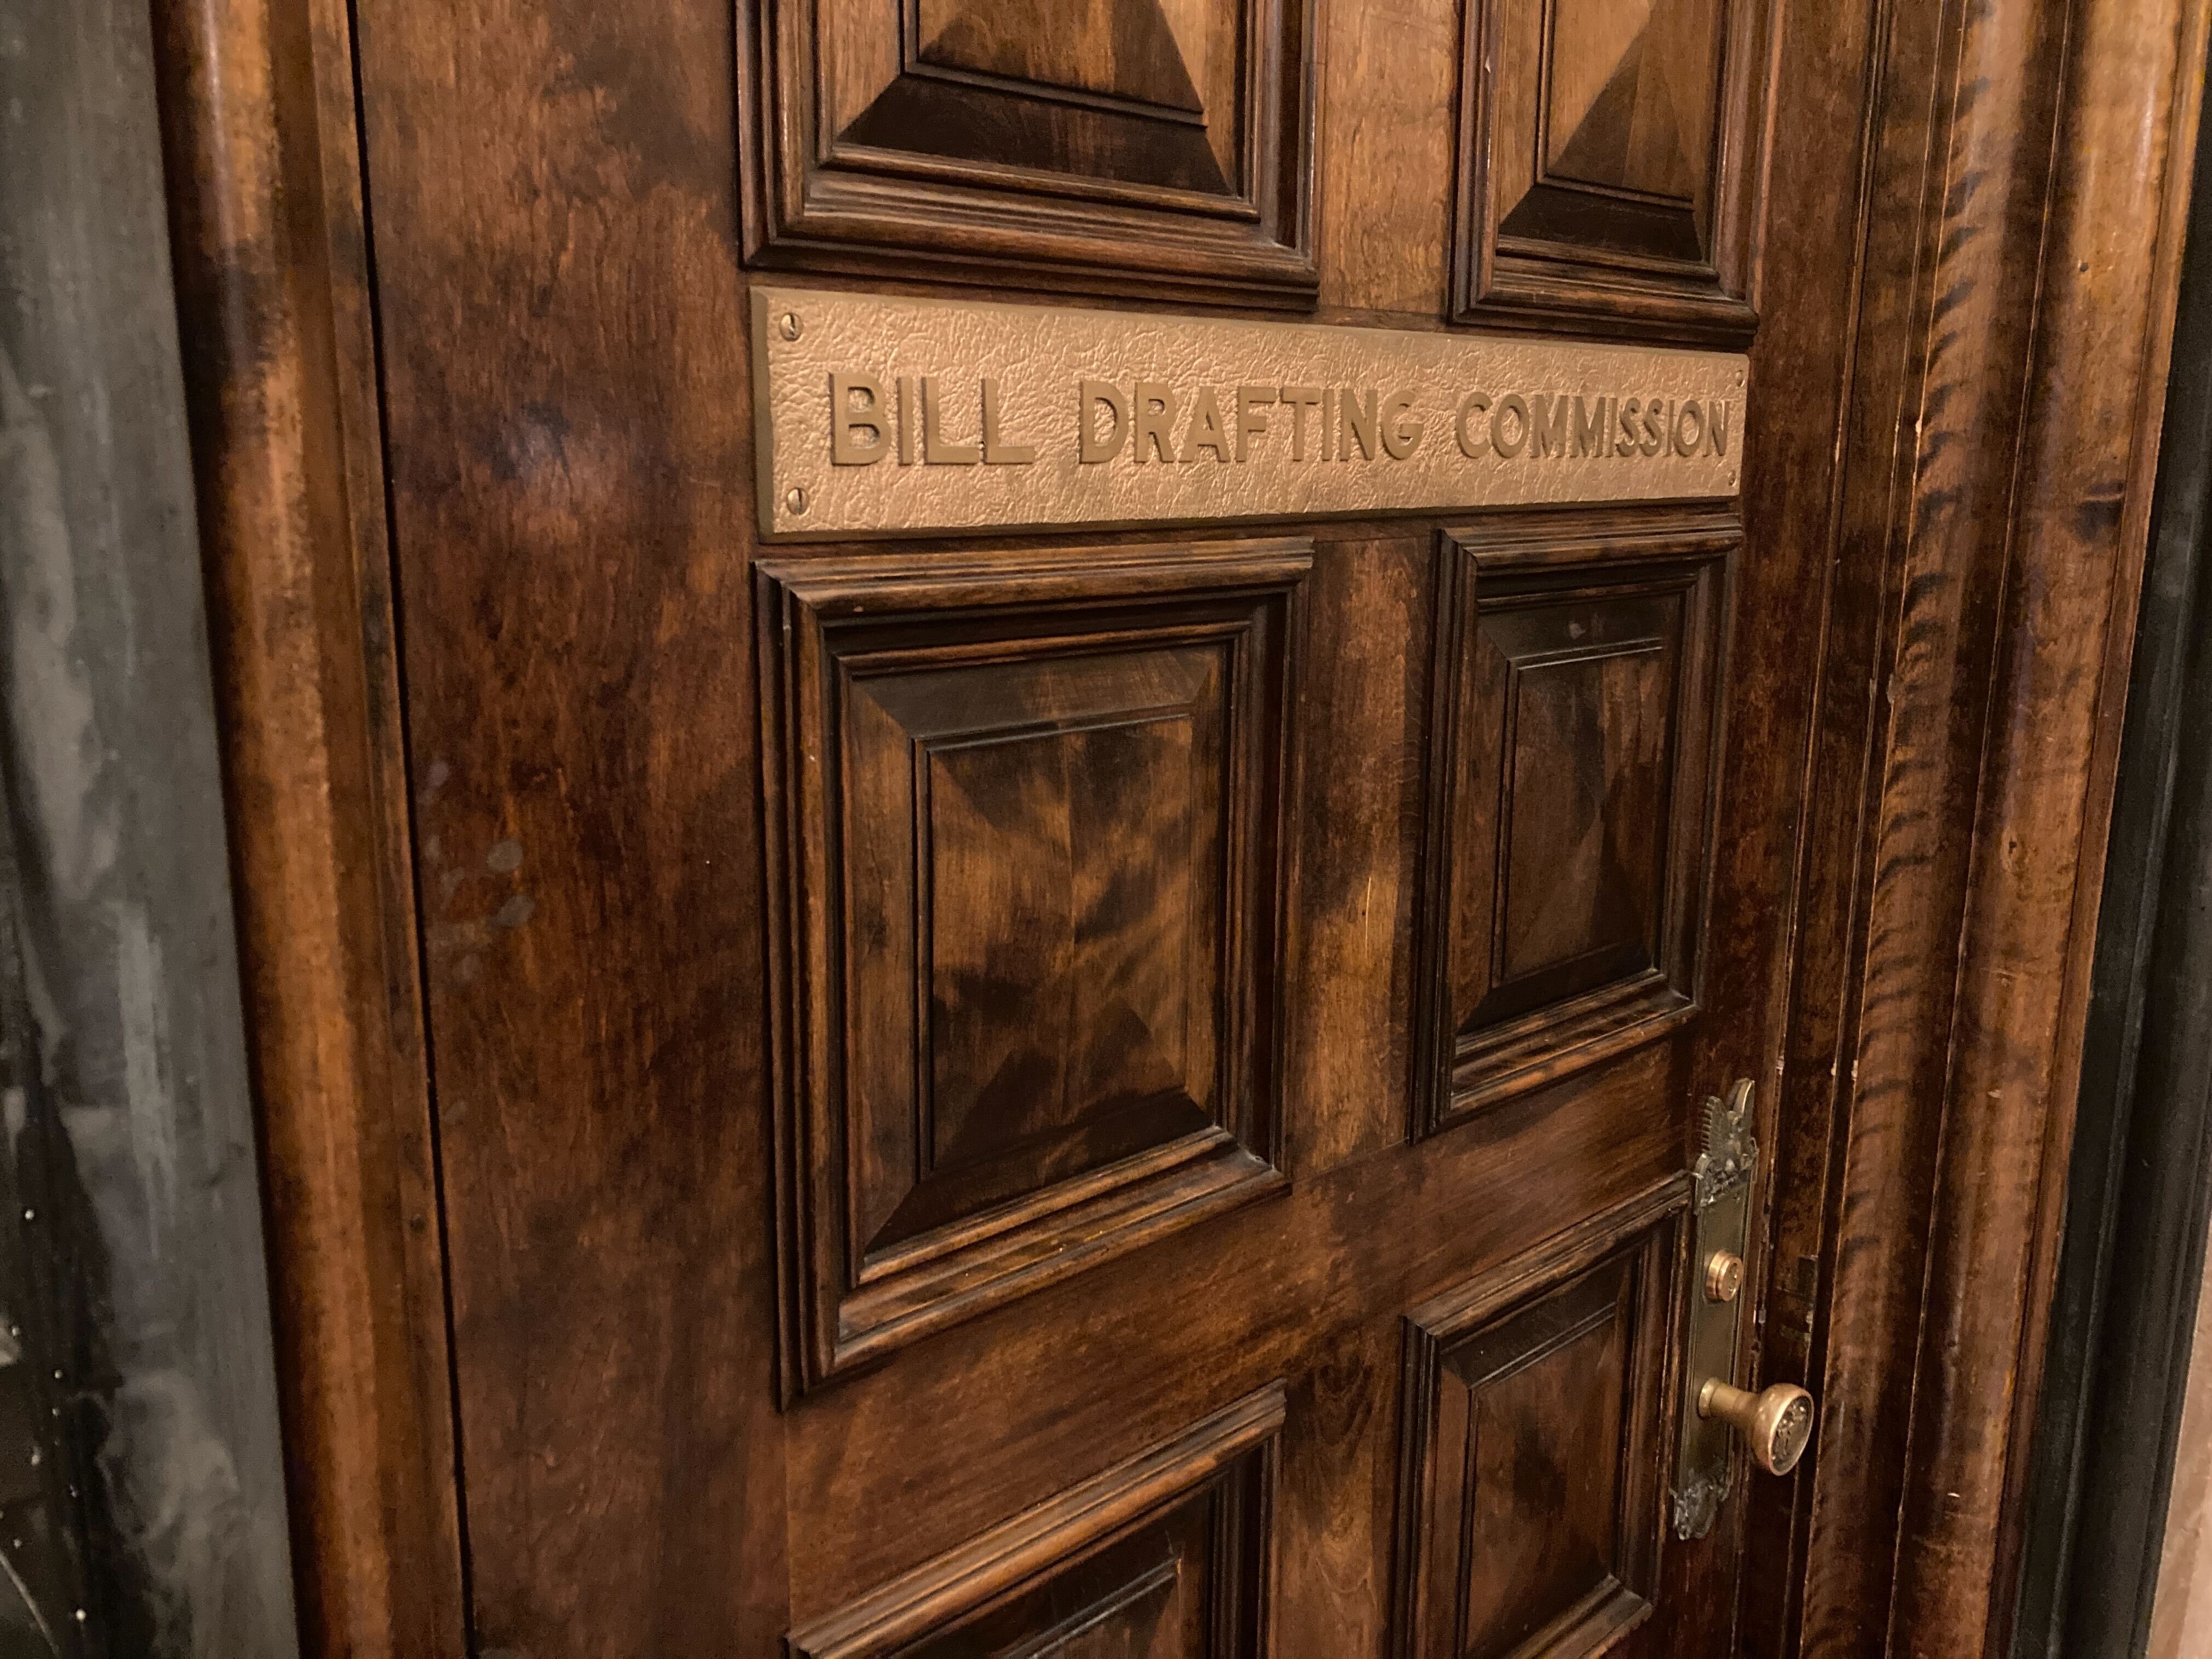 A wooden door at the state Capitol in Albany with a sign saying "bill drafting commission."